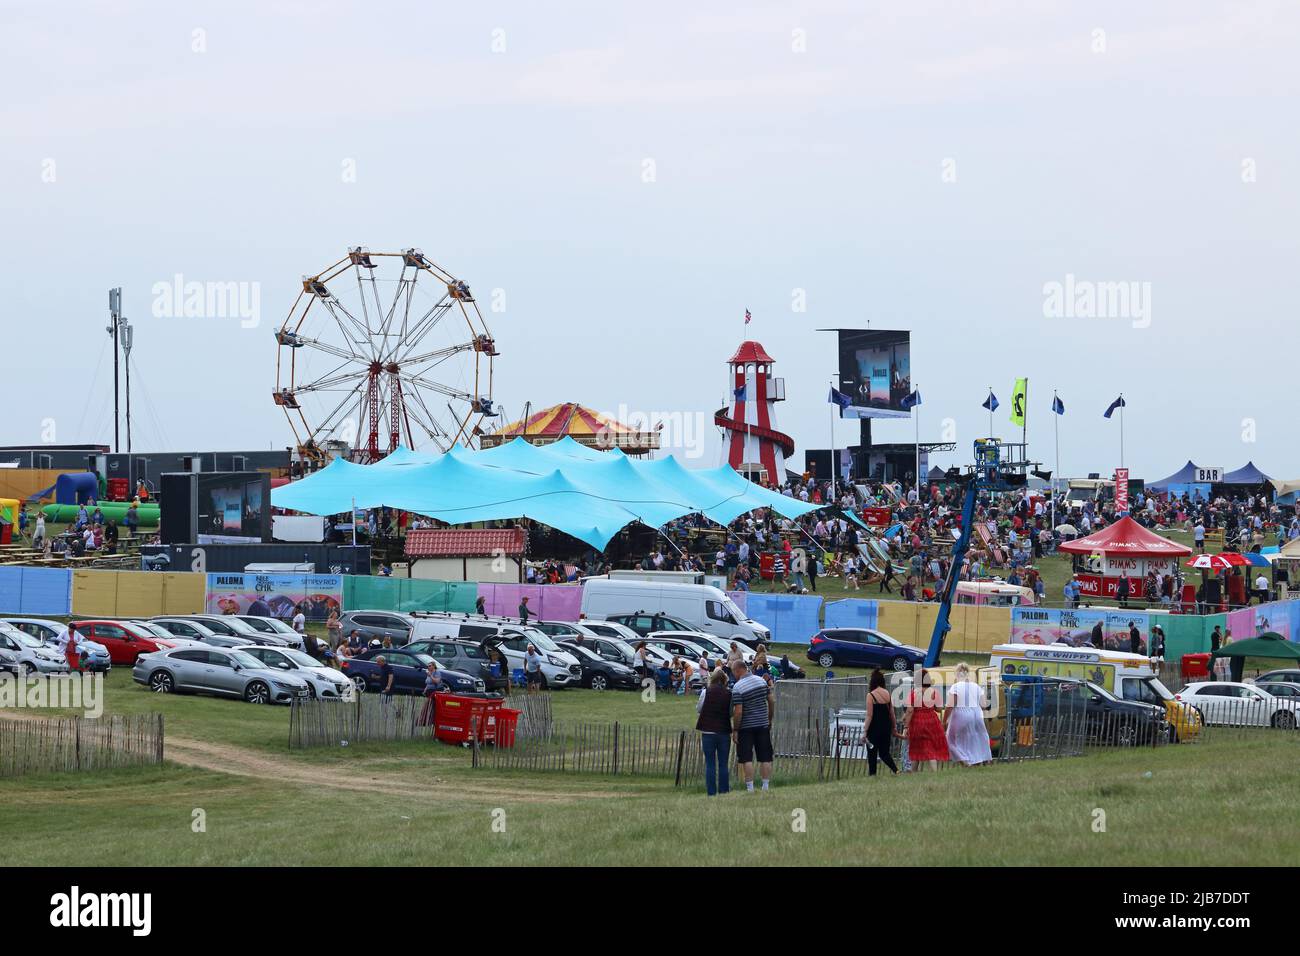 Epsom Downs, Surrey, England, UK. 3rd June, 2022. Fun fair on the downs on Ladies Day horse racing festival at Epsom Downs in Surrey, part of the Platinum Jubilee weekend celebrations for the 70 year reign of the British monarch Queen Elizabeth II. Credit: Julia Gavin/Alamy Live News Stock Photo